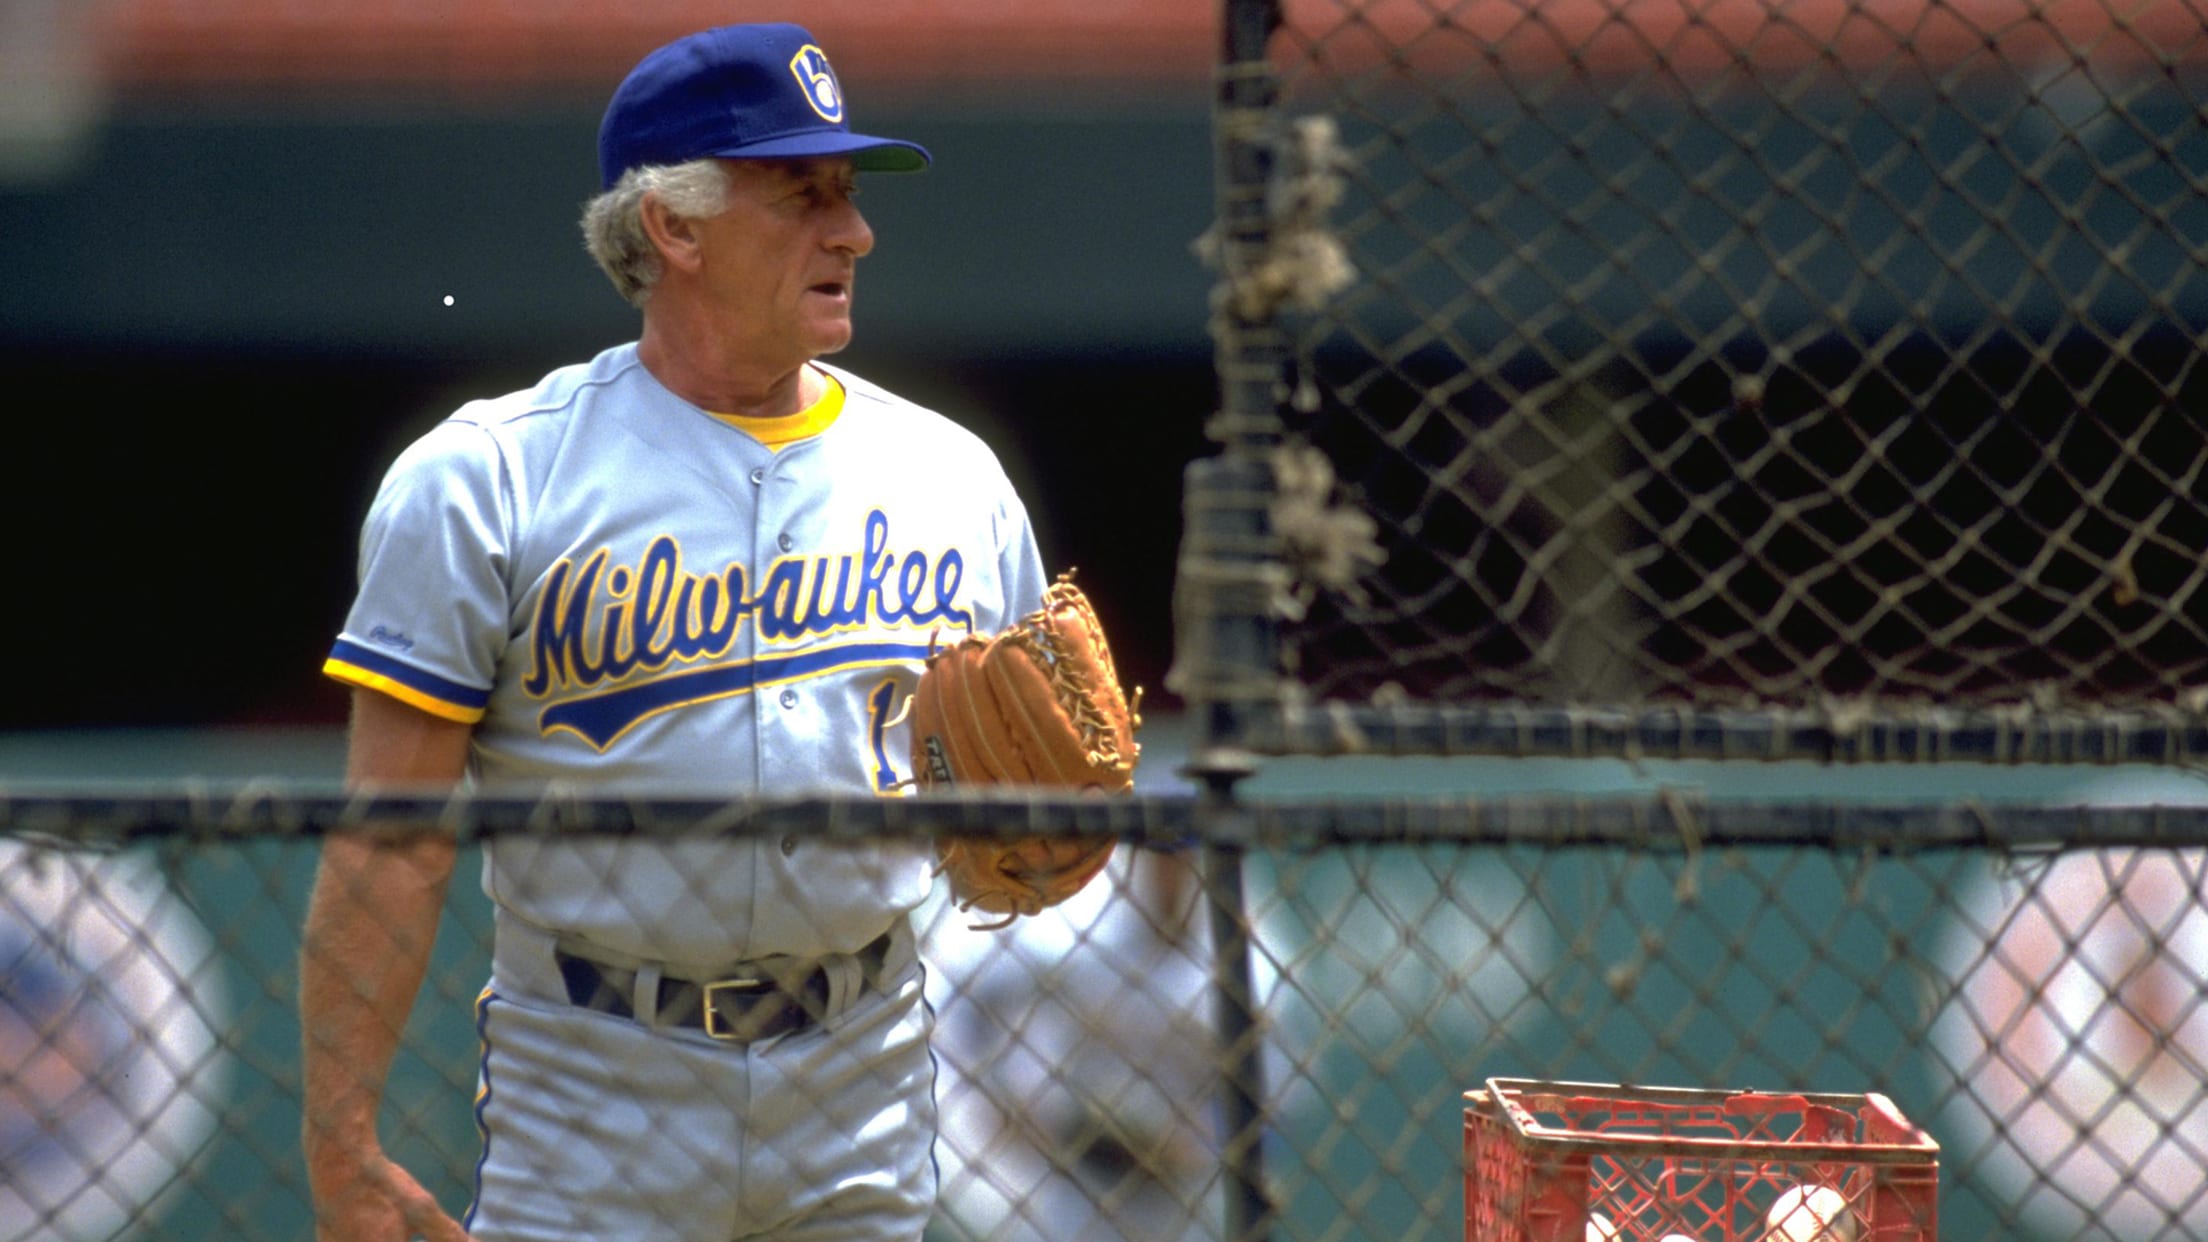 Bob Uecker role in Brewers history, 2021 playoff run